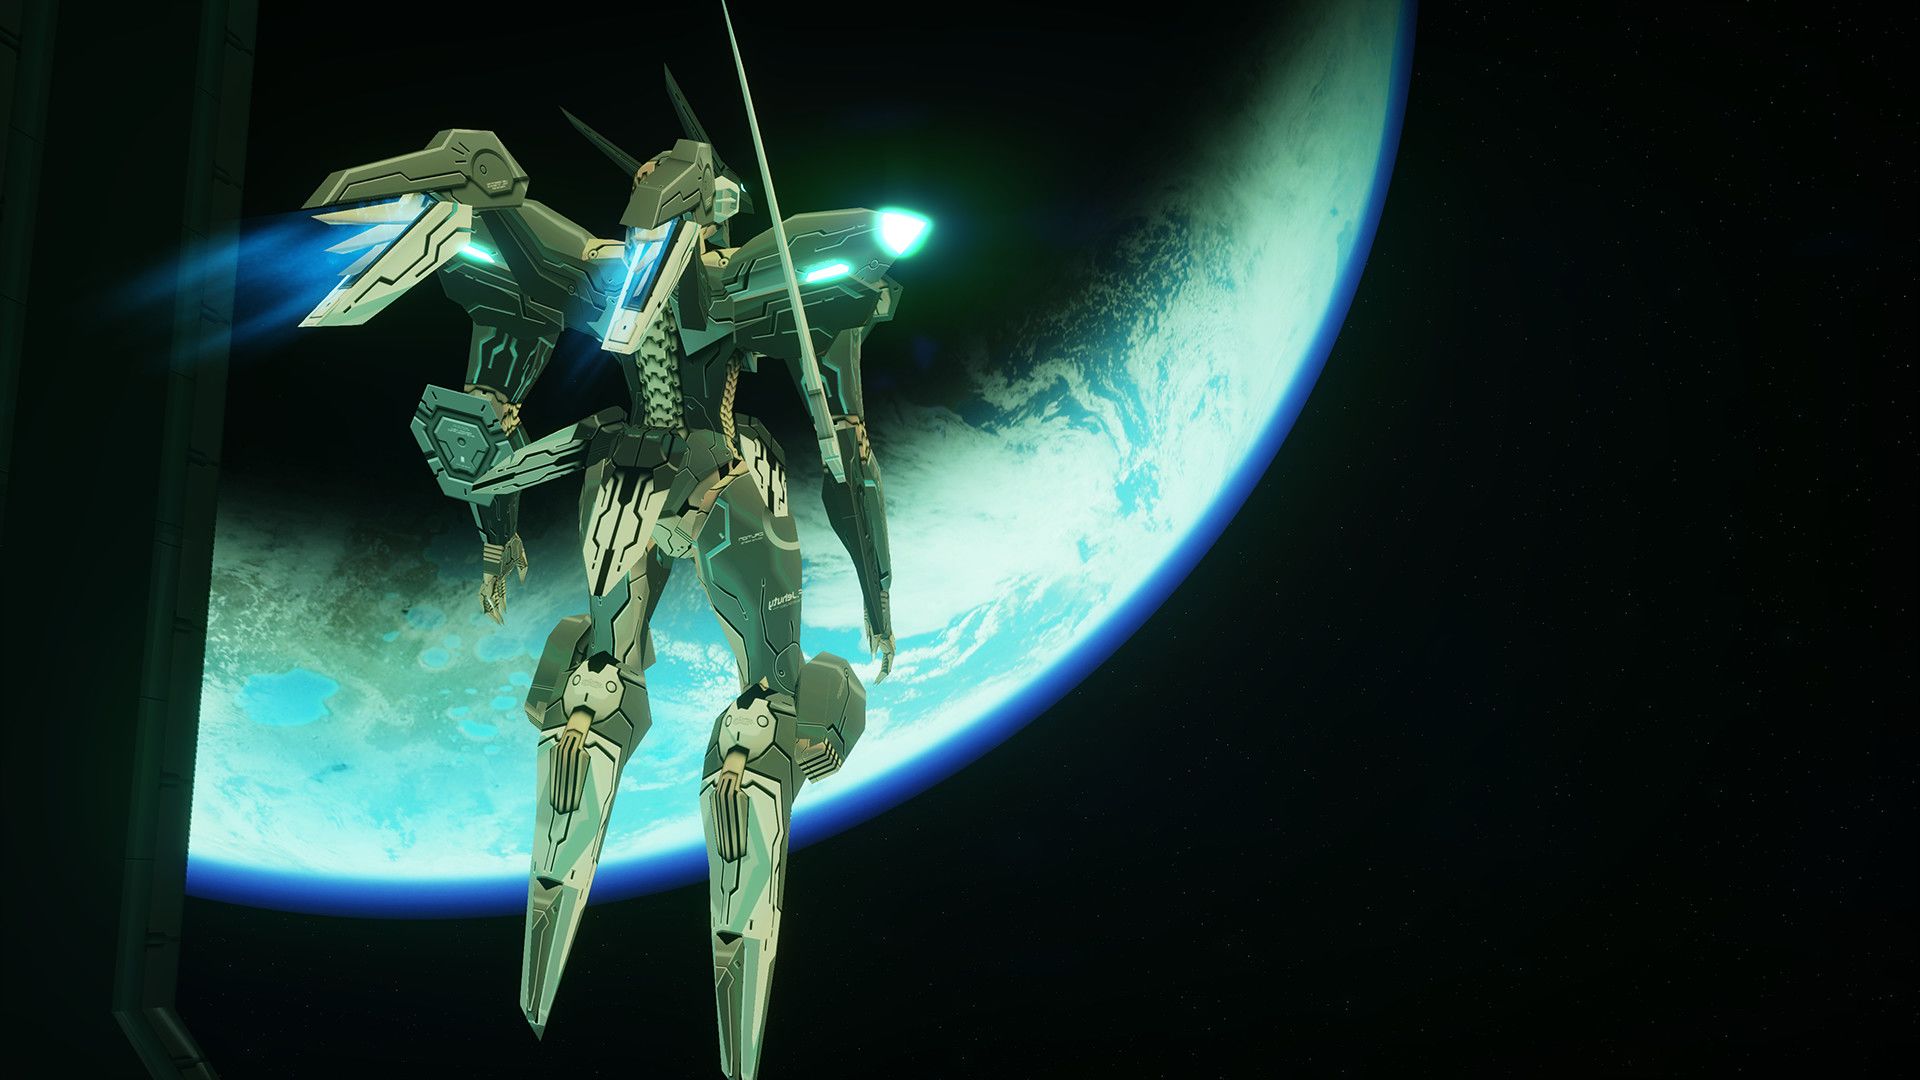 Zone of the Enders: The 2nd Runner∀RS Review